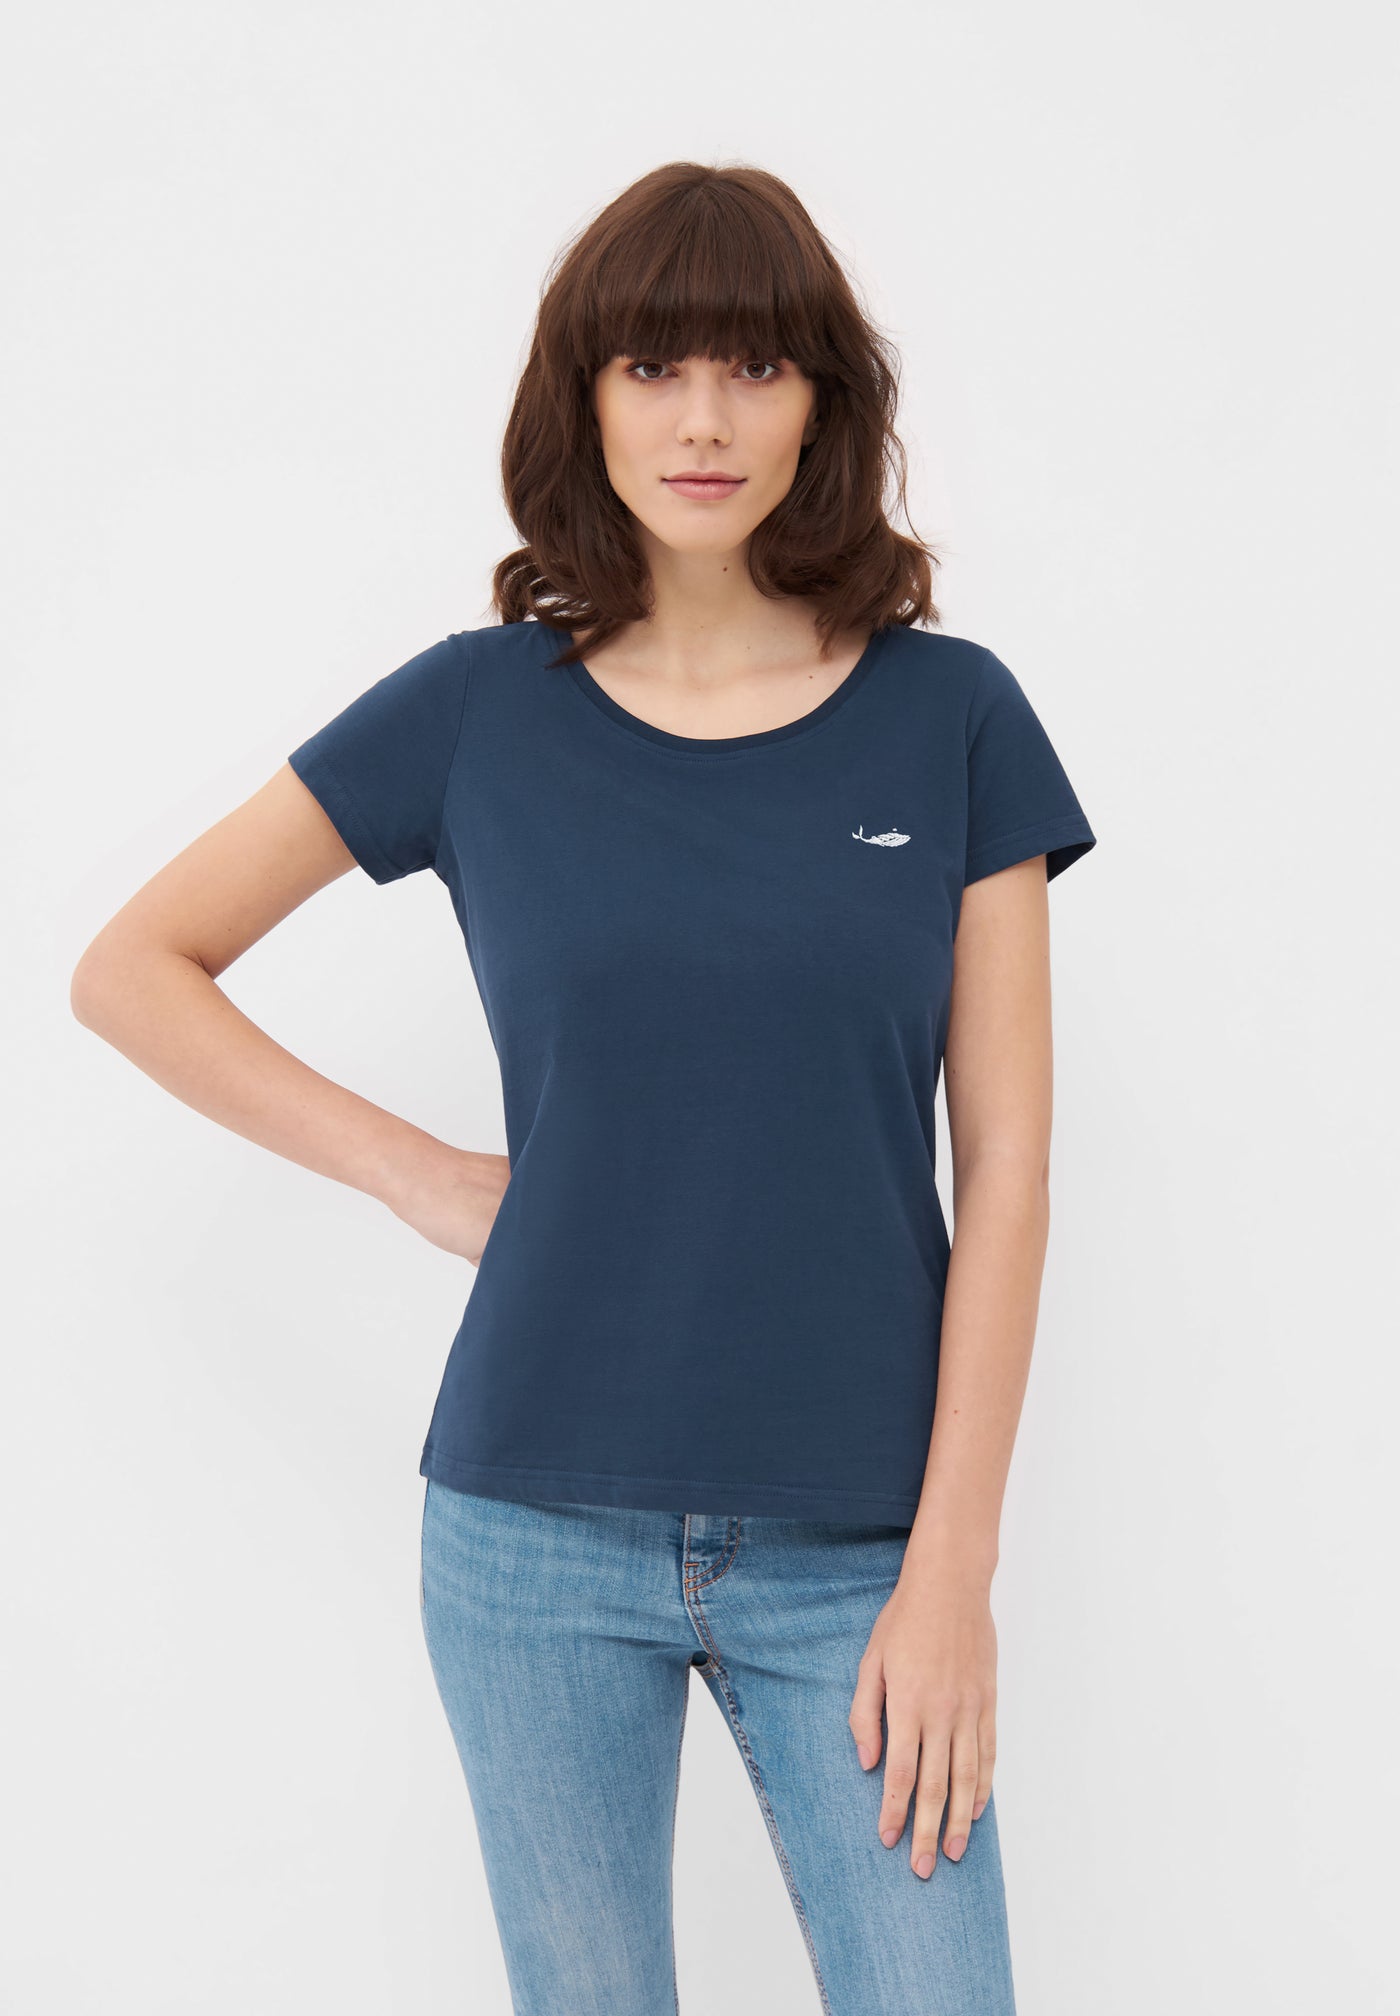 MBRC WOMEN SUSTAINABLE BLUE ROUND NECK T-SHIRT "WHITE LOGO" - FRONTAL VIEW